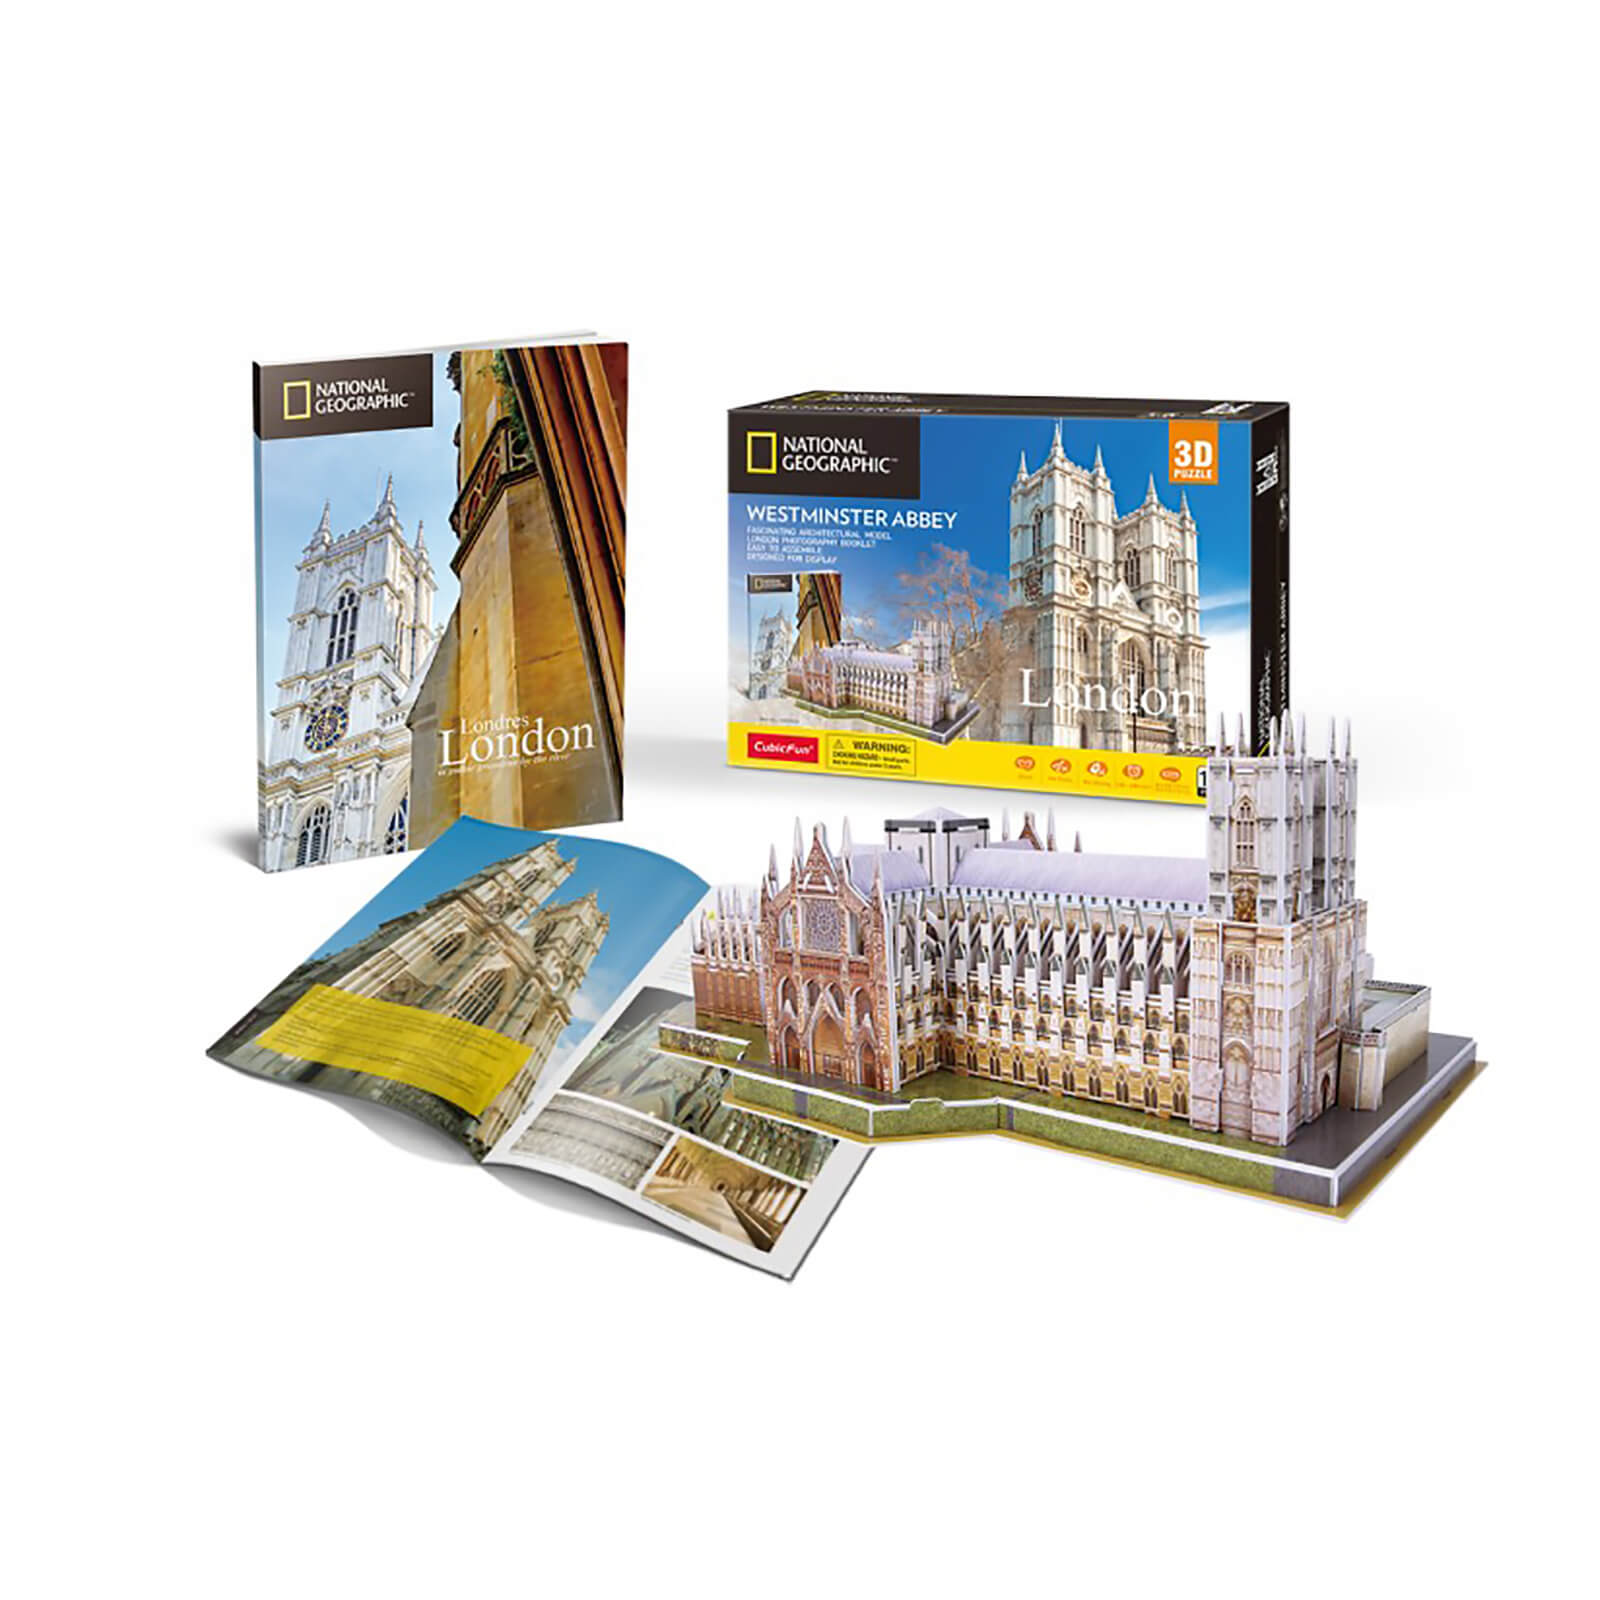 National Geographic – Westminster Abbey 3D Jigsaw Puzzle